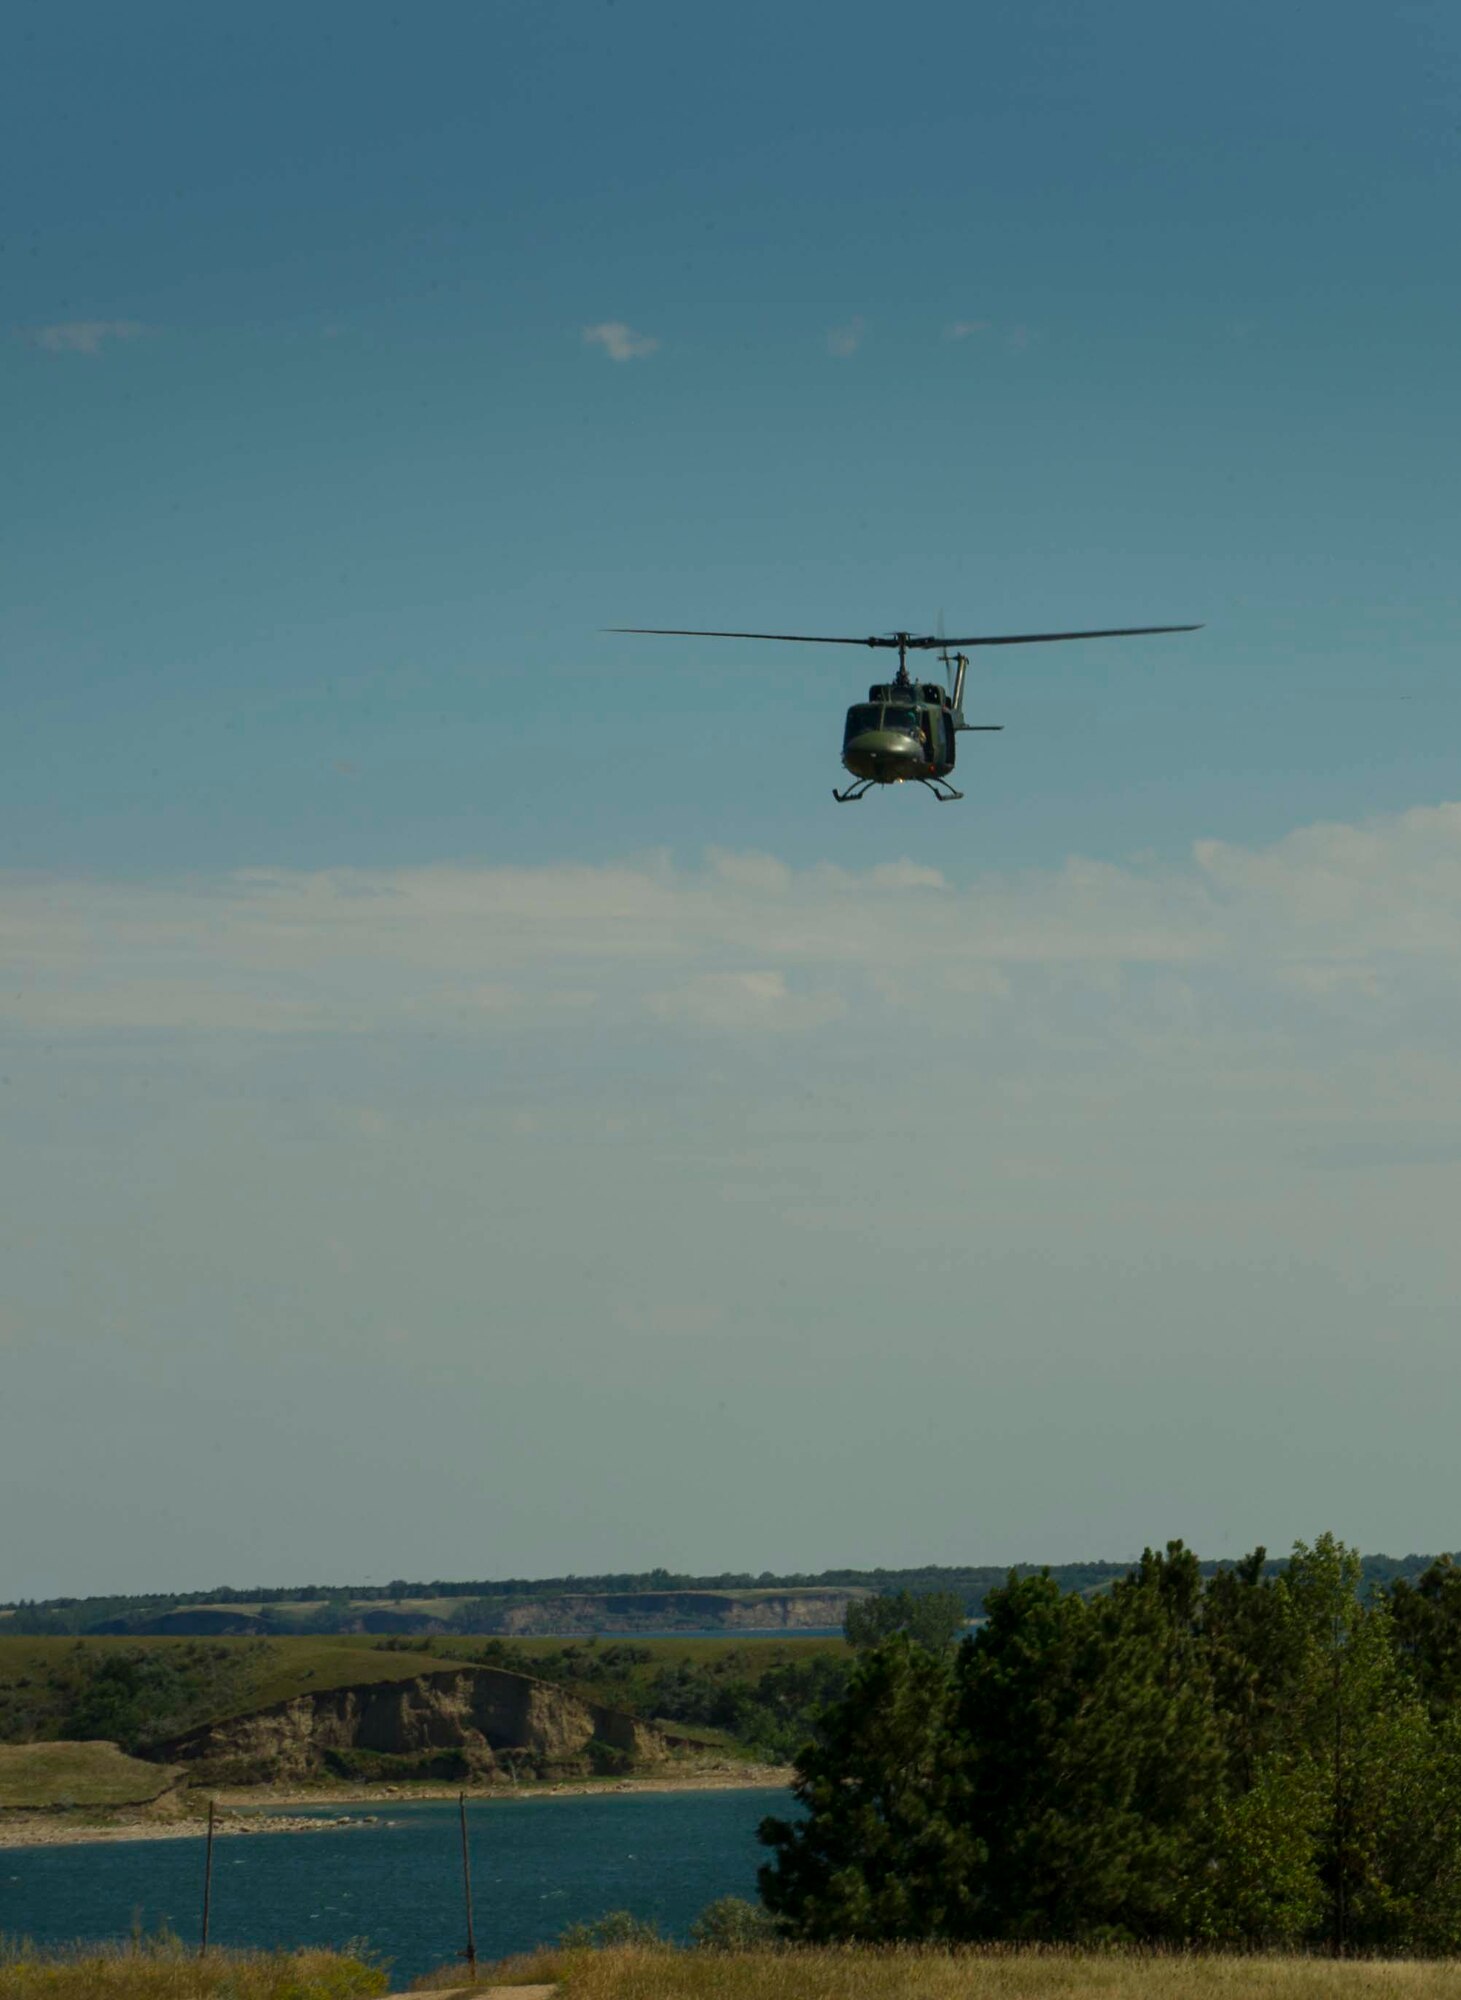 Aircrew in a UH-1N Iroquois scans the land during vector training in Garrison, N.D., Aug. 11, 2016. The Huey crew was vectored in by Airmen on the ground portraying a search and rescue scenario. (U.S. Air Force photo/Senior Airman Apryl Hall)